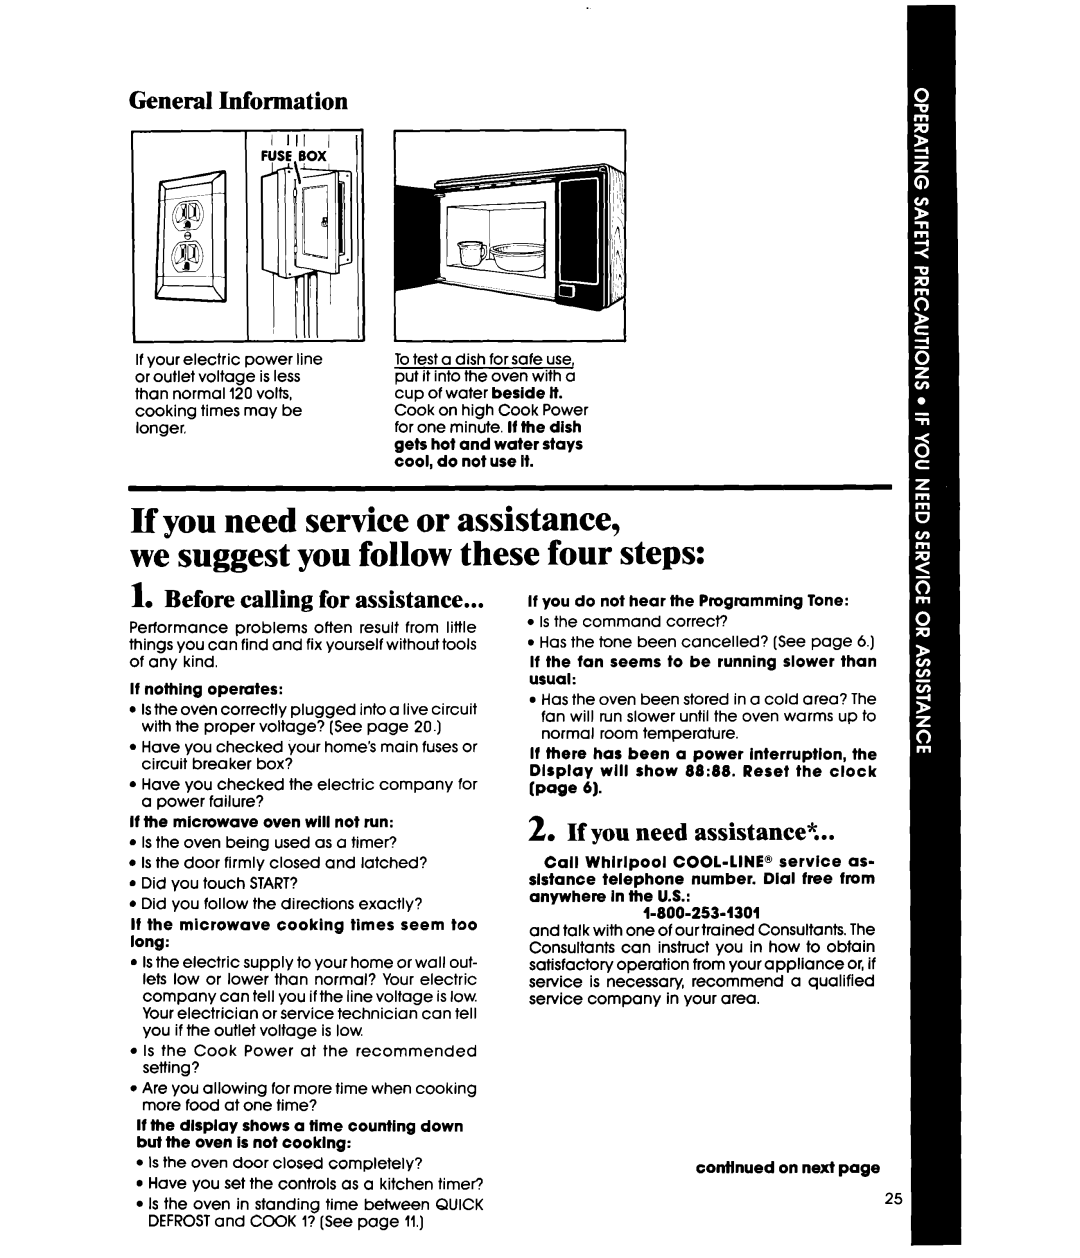 Whirlpool MW3500XS manual If you need service or assistance, we suggest you follow these four steps, General Information 